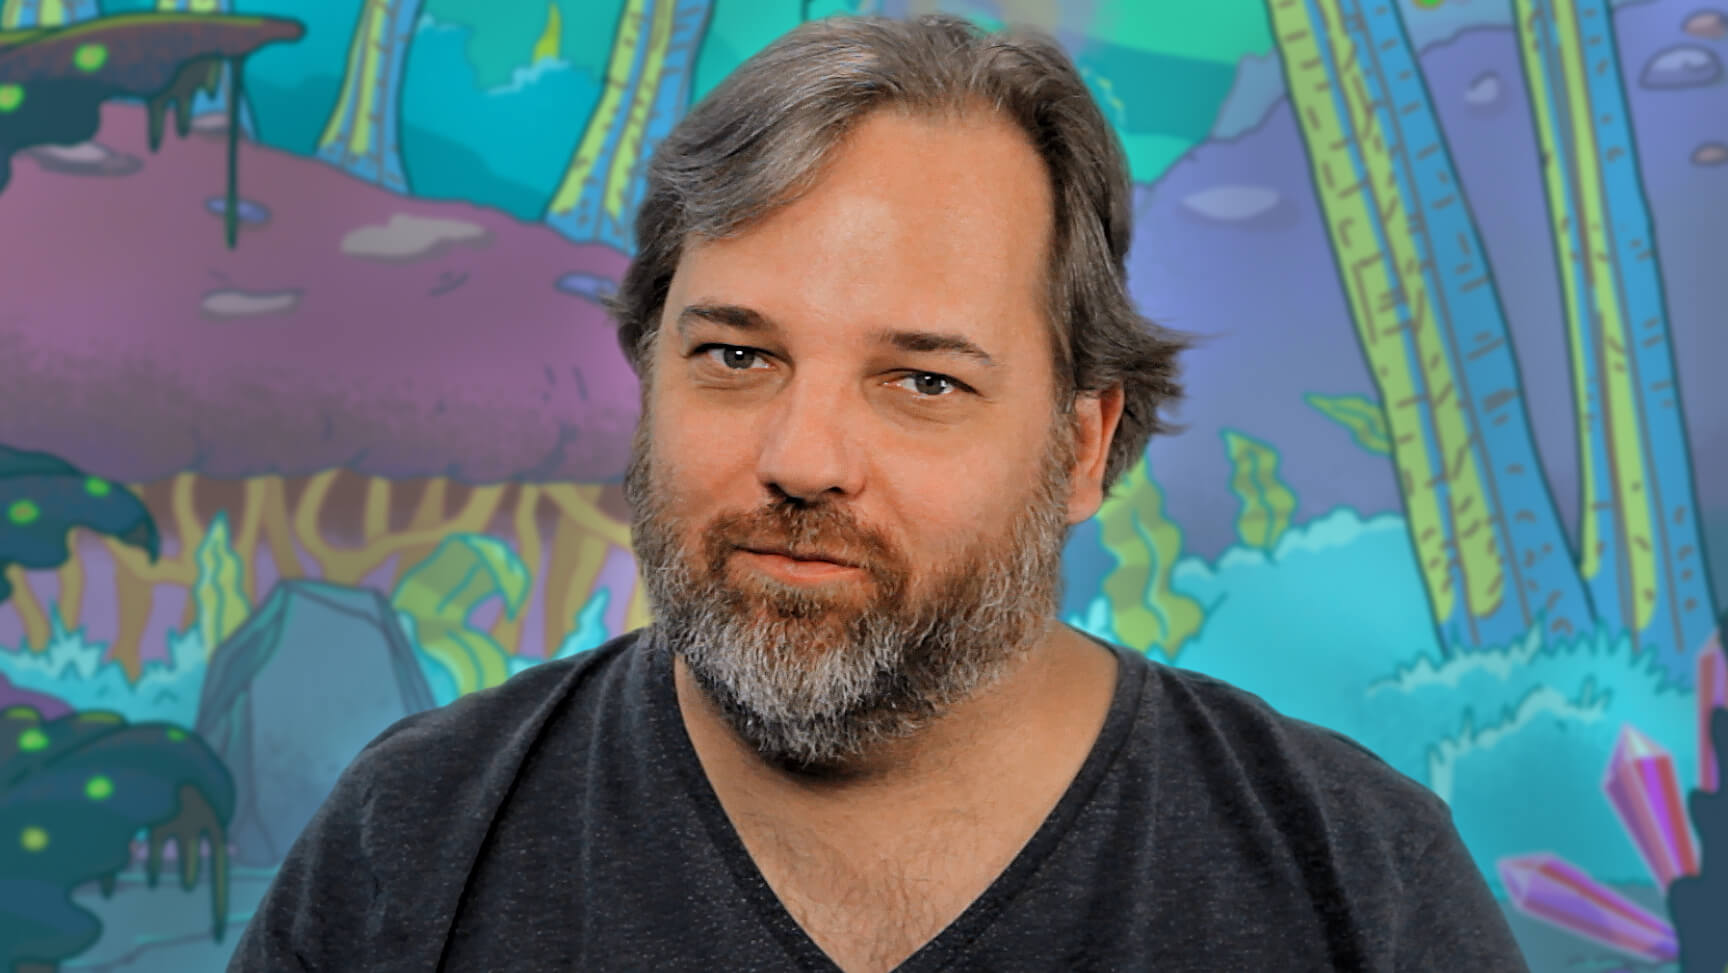 Rick and Morty Co-creator Dan Harmon is interviewed for a behind the scenes feature produced by Todd Bishop